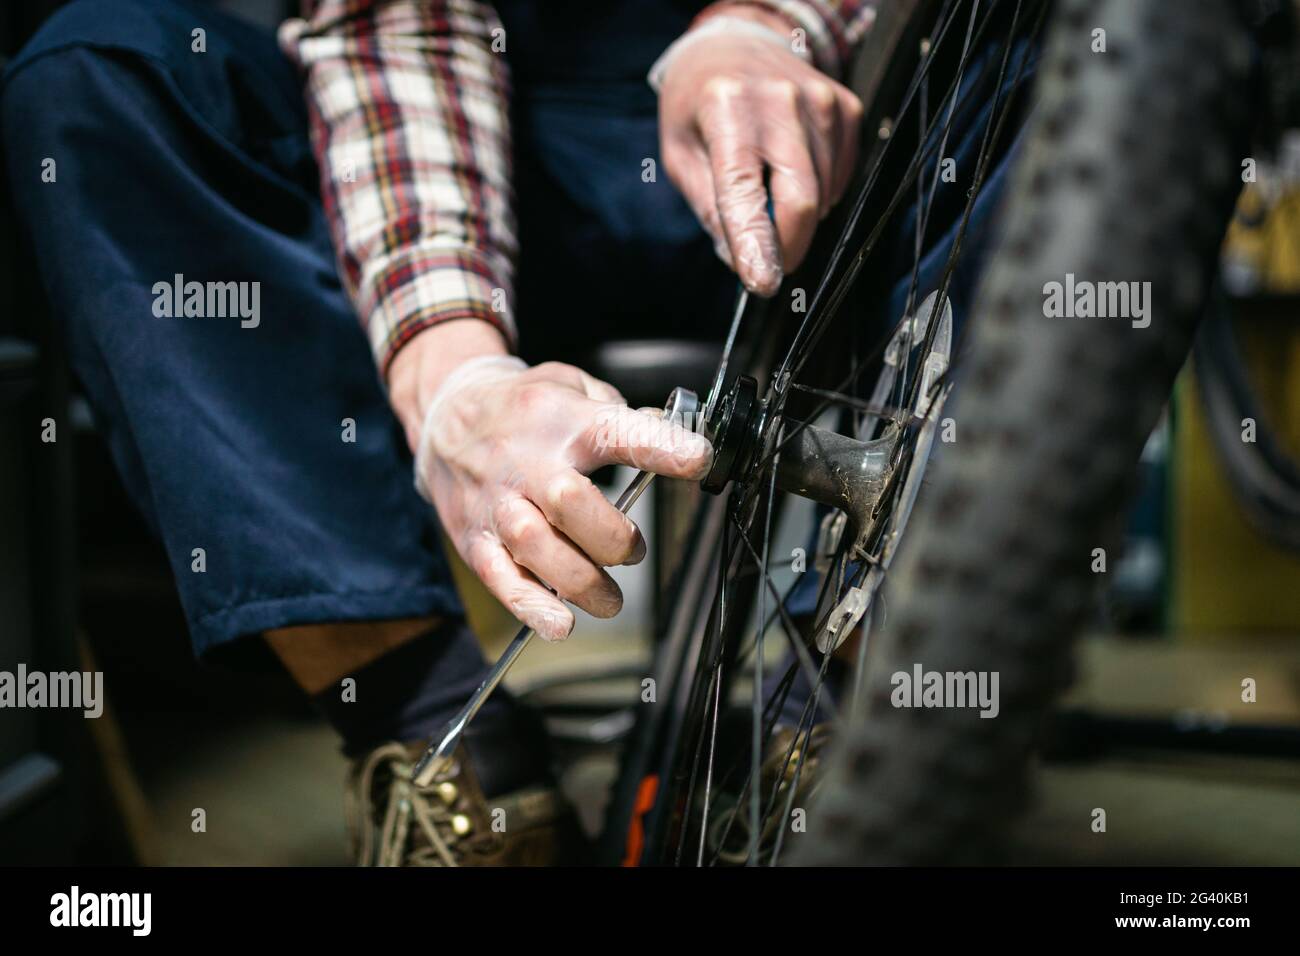 Male mechanic working in bicycle repair shop, mechanic repairing bike using special tool, wearing protective gloves. Young attra Stock Photo